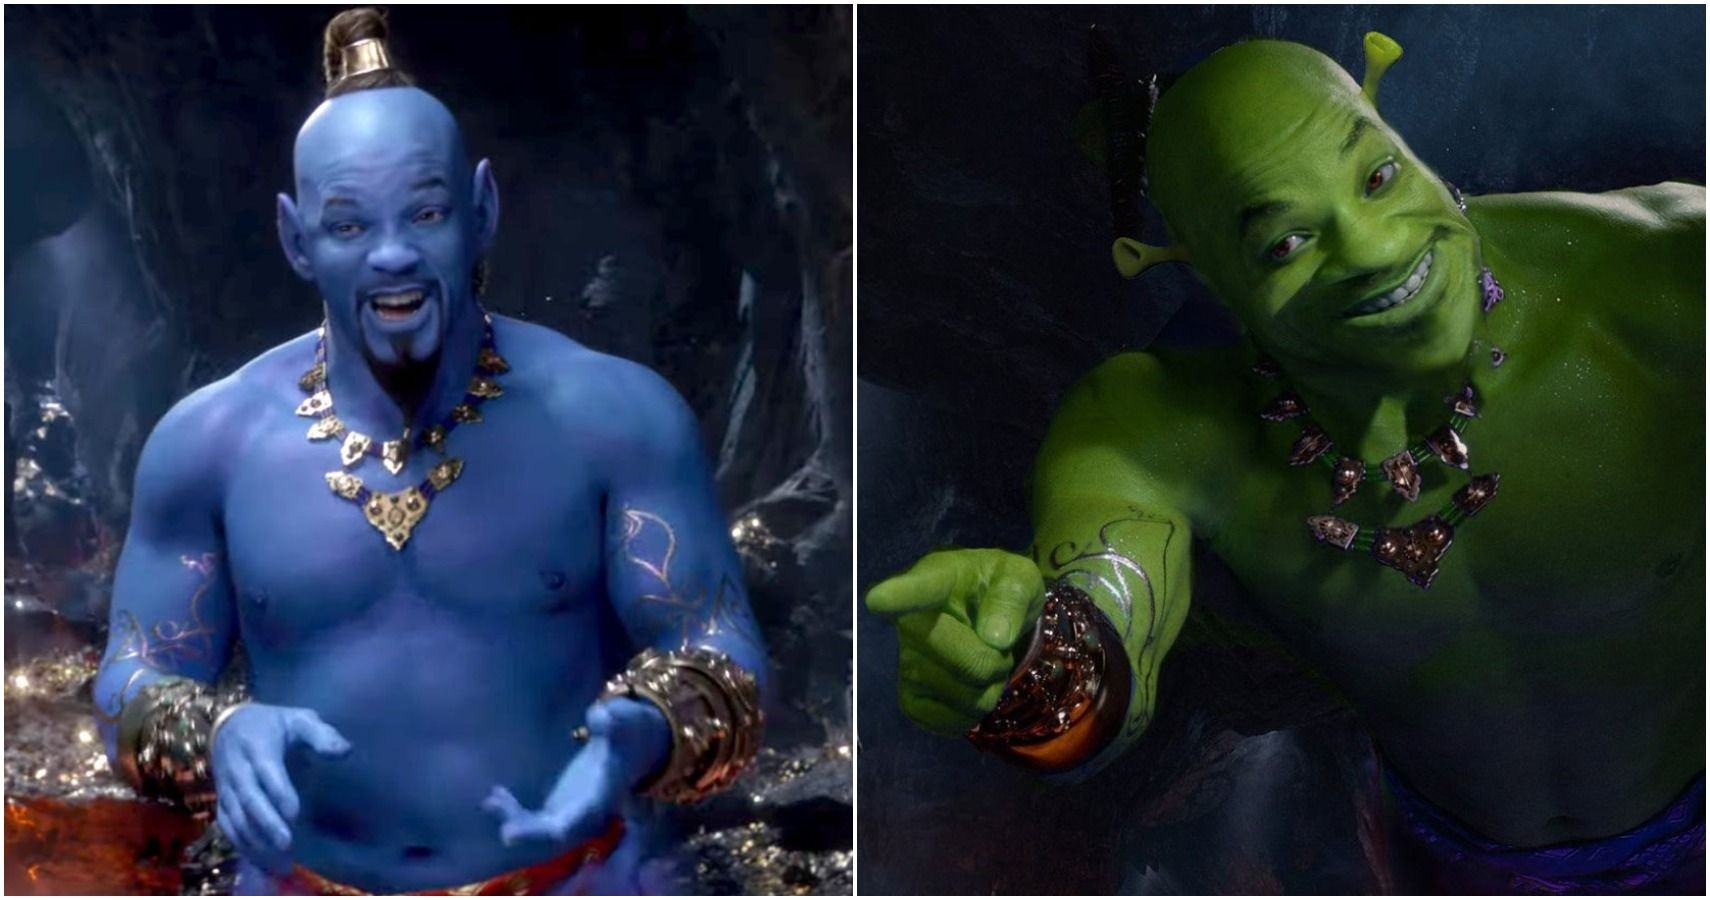 Aladdin: 10 Hilarious Will Smith Genie Memes That Have Us Laughing